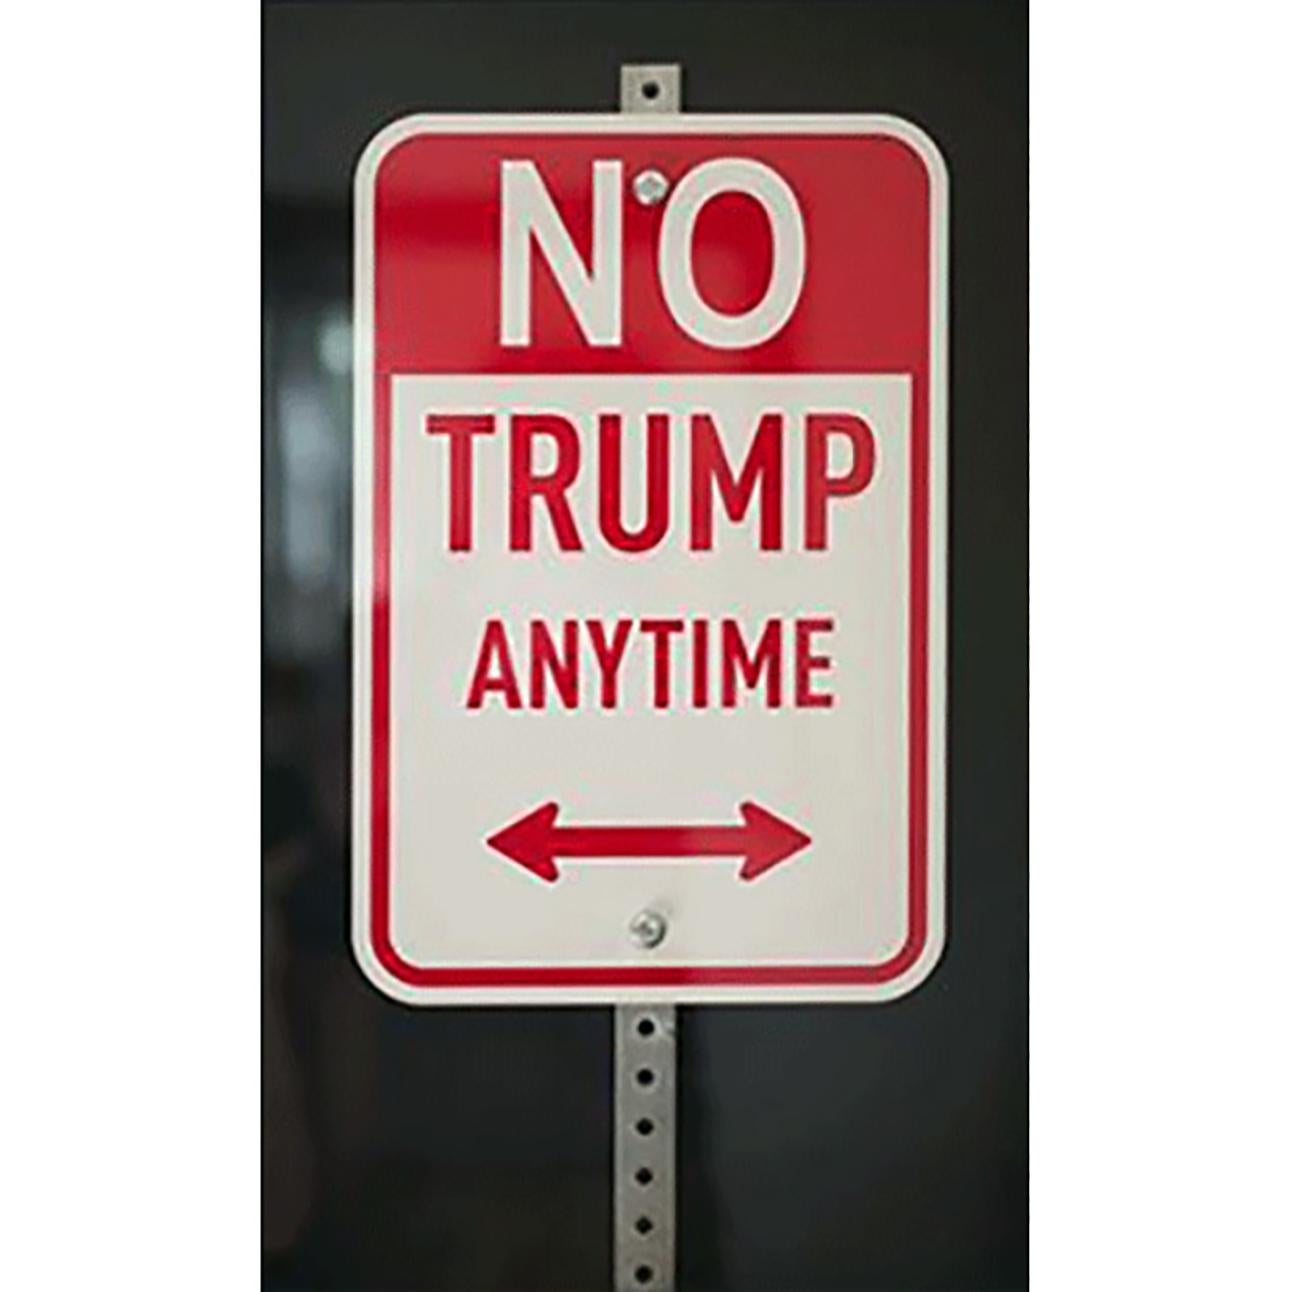 "No Trump Anytime" - Contemporary Street Art - Sculpture by Plastic Jesus